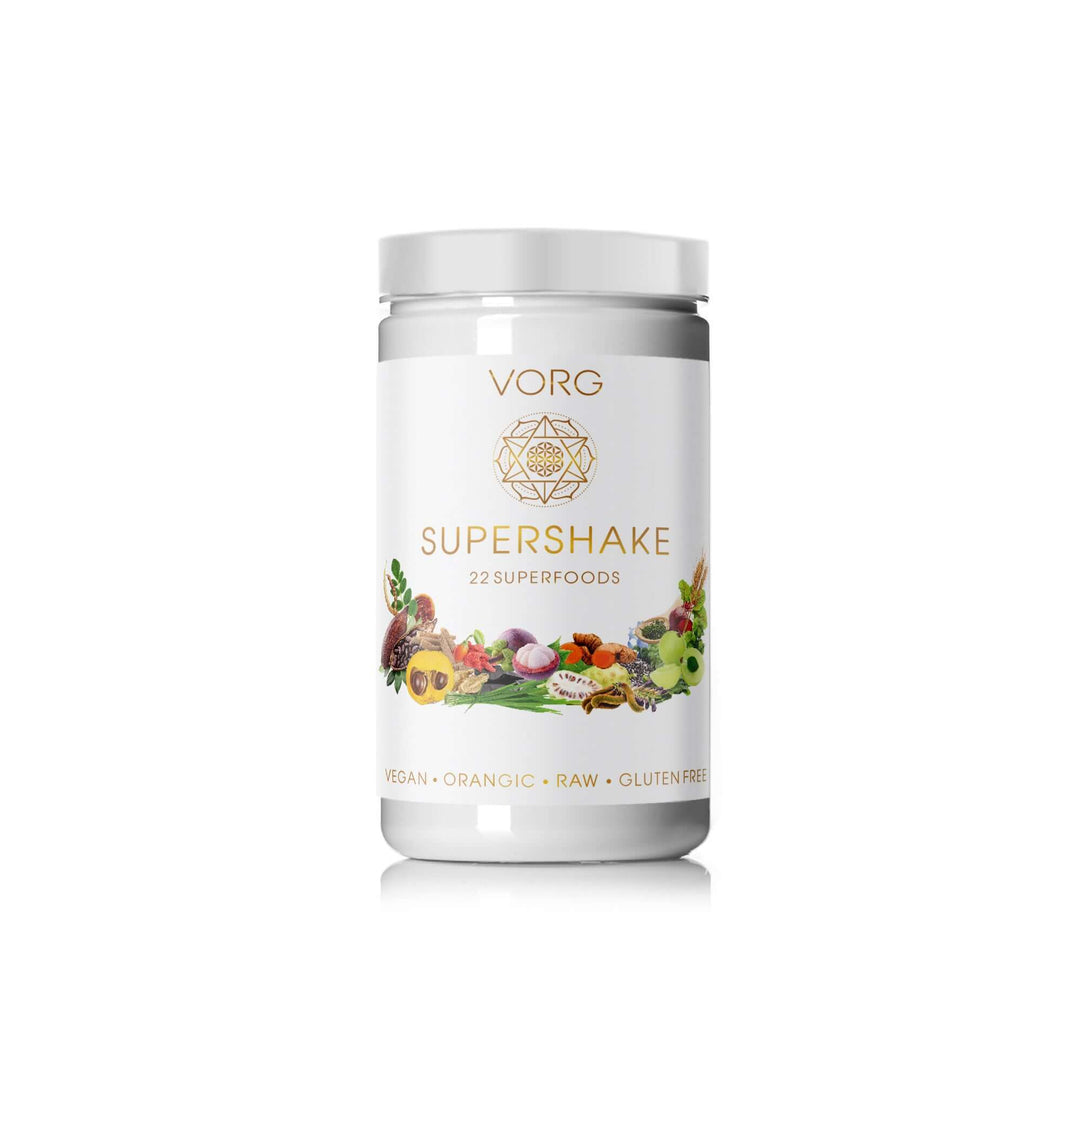 SuperShake: A vegan meal replacement packed with superfoods